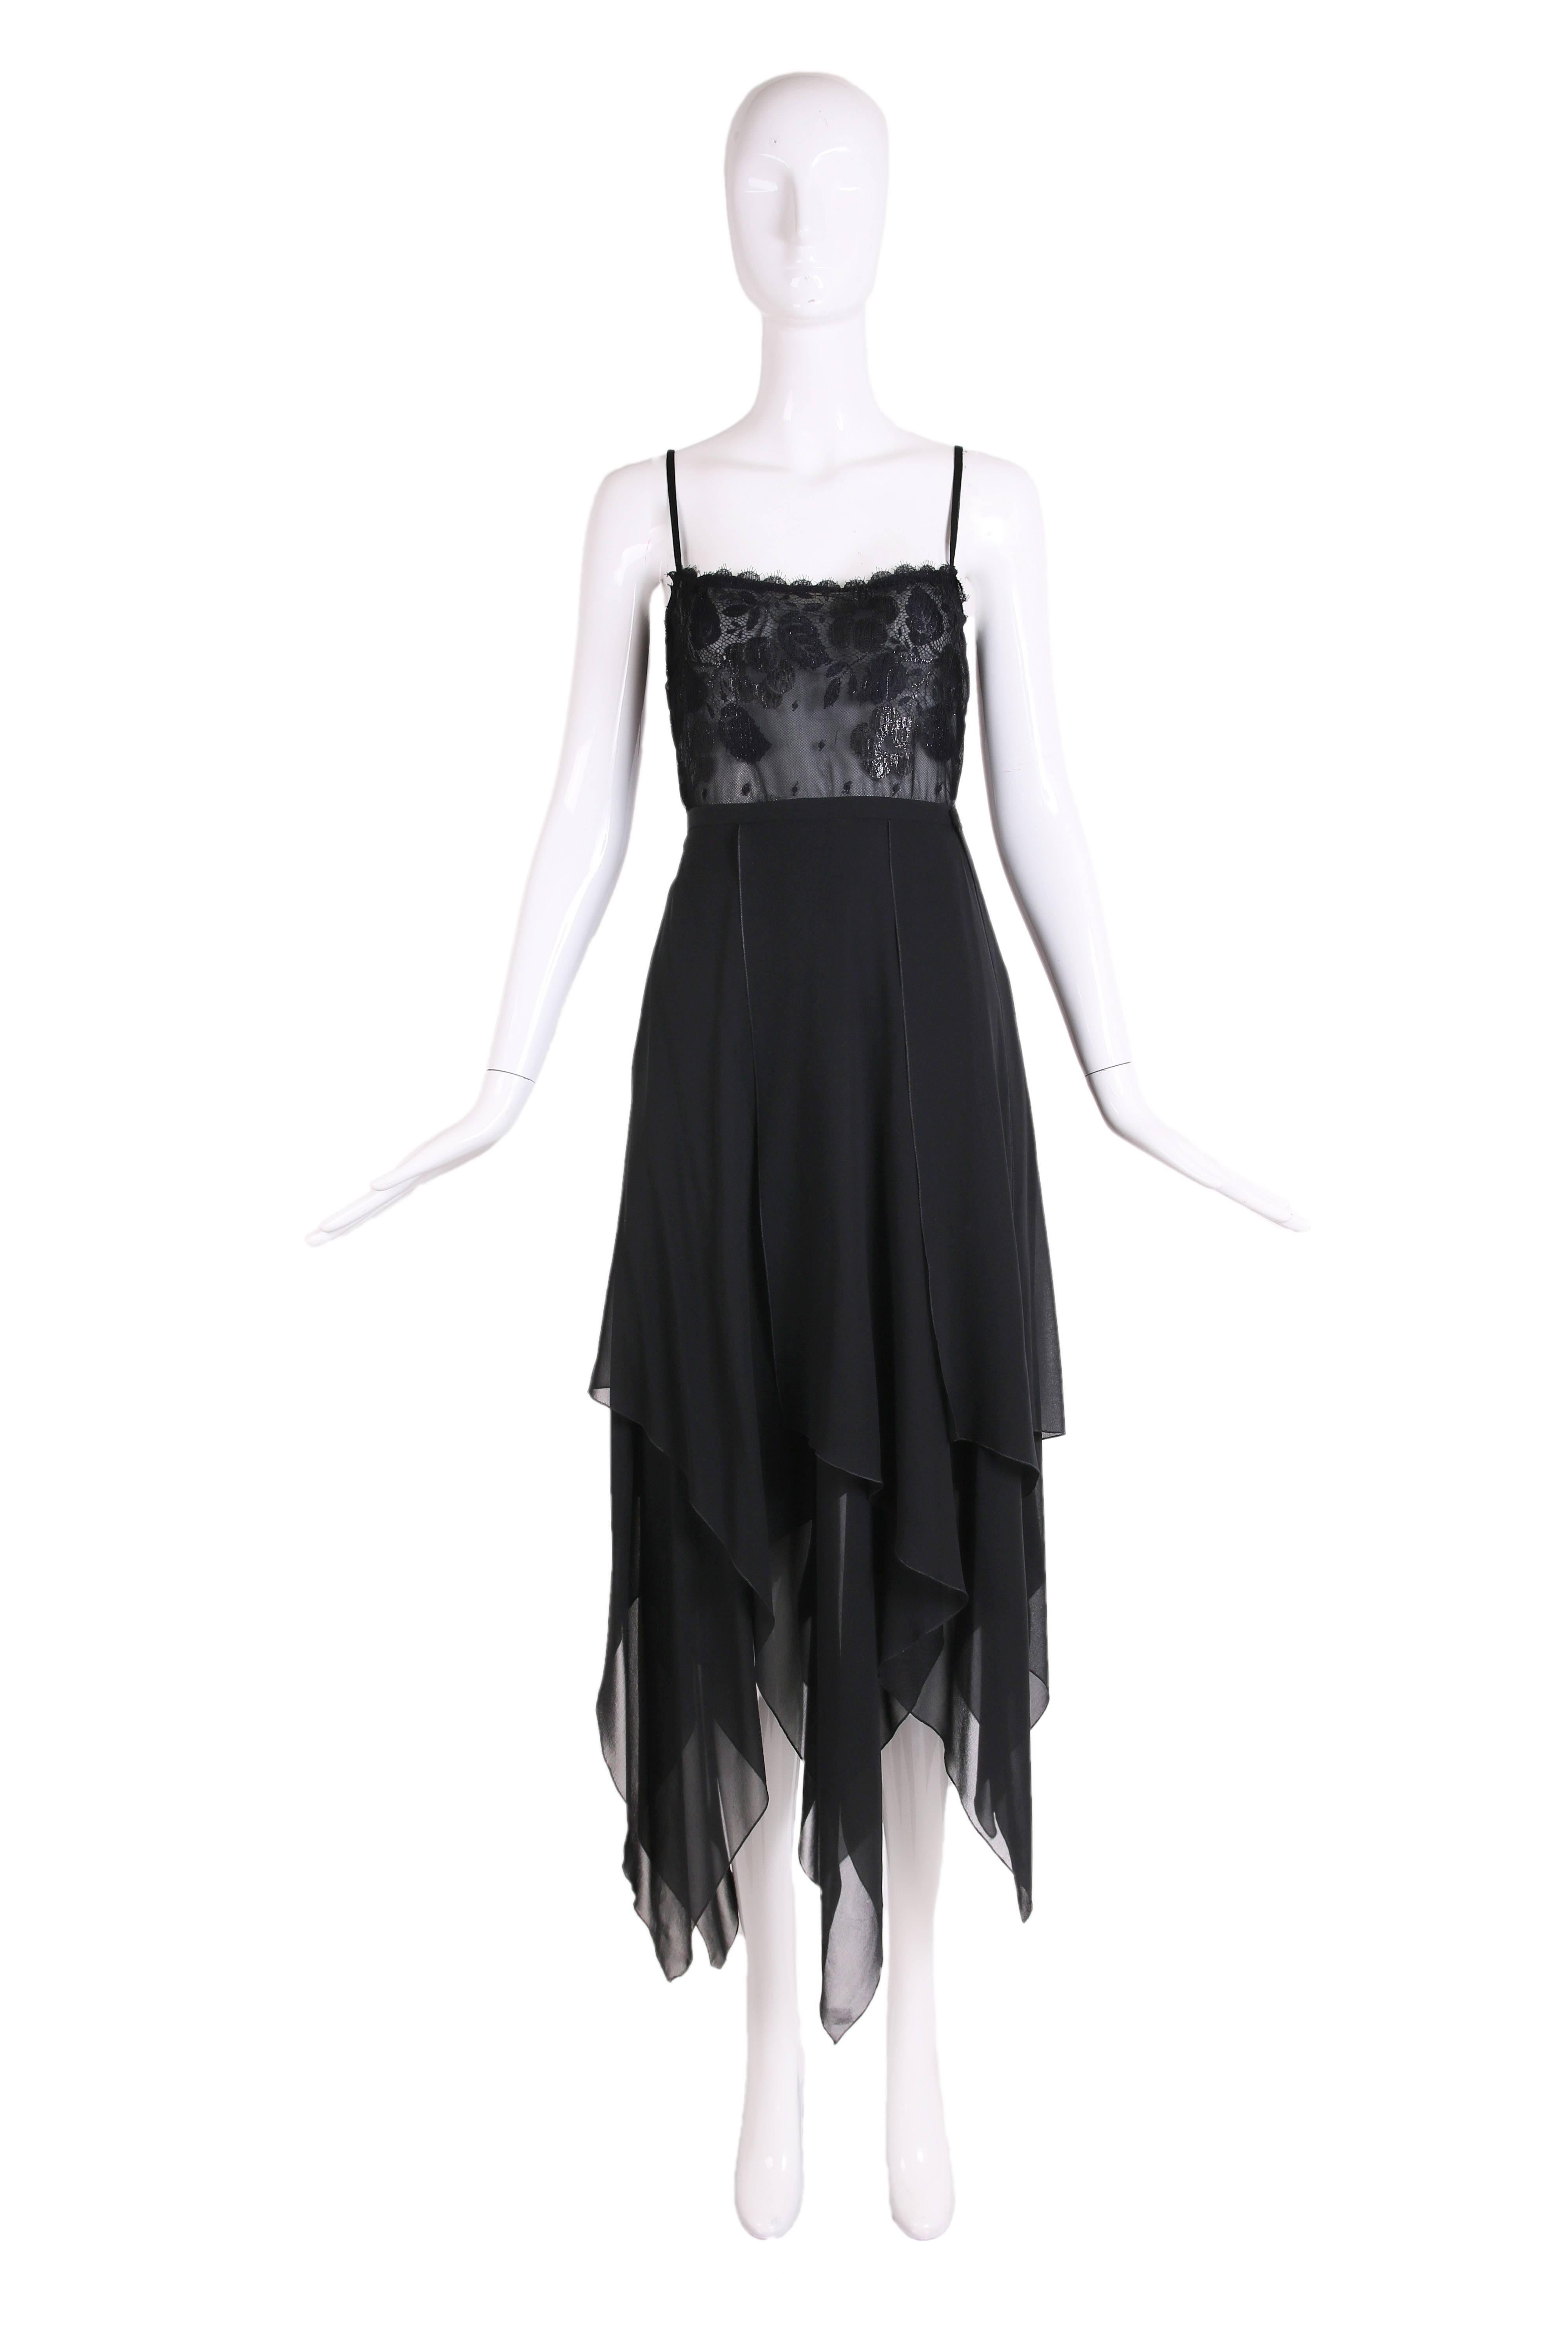 1970's Guy Laroche black metallic lace spaghetti strap camisole with black chiffon multi-layered skirt featuring a hanky hem. In excellent condition. Skirt size tag 42 - top has no tag. Please consult measurements.
MEASUREMENTS:
Top
Bust - 36